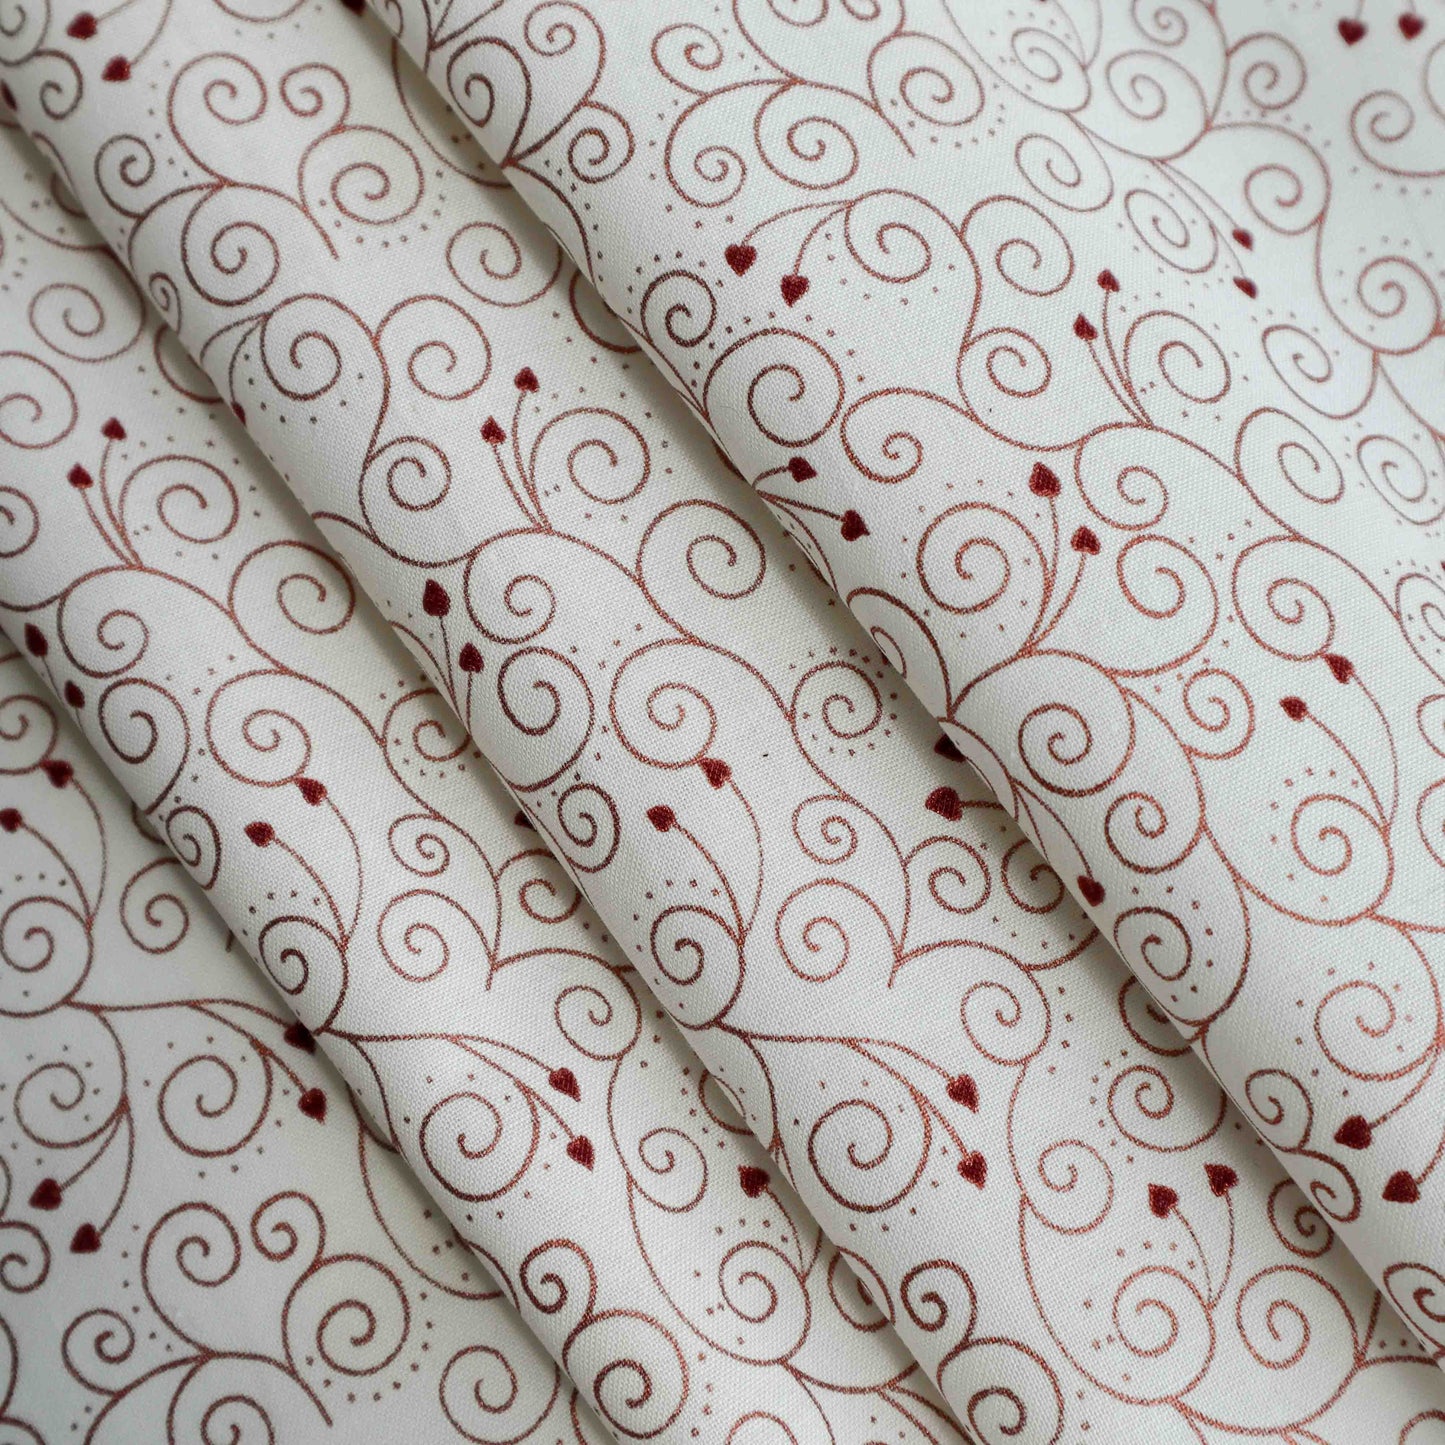 Lightweight Japanese Cotton Poplin weave in Gardenia prints. This fabric has a dry, smooth hand feel yet softens considerably after washing. This fluid-non stretch fabric has subtle texture throughout and matte finish.